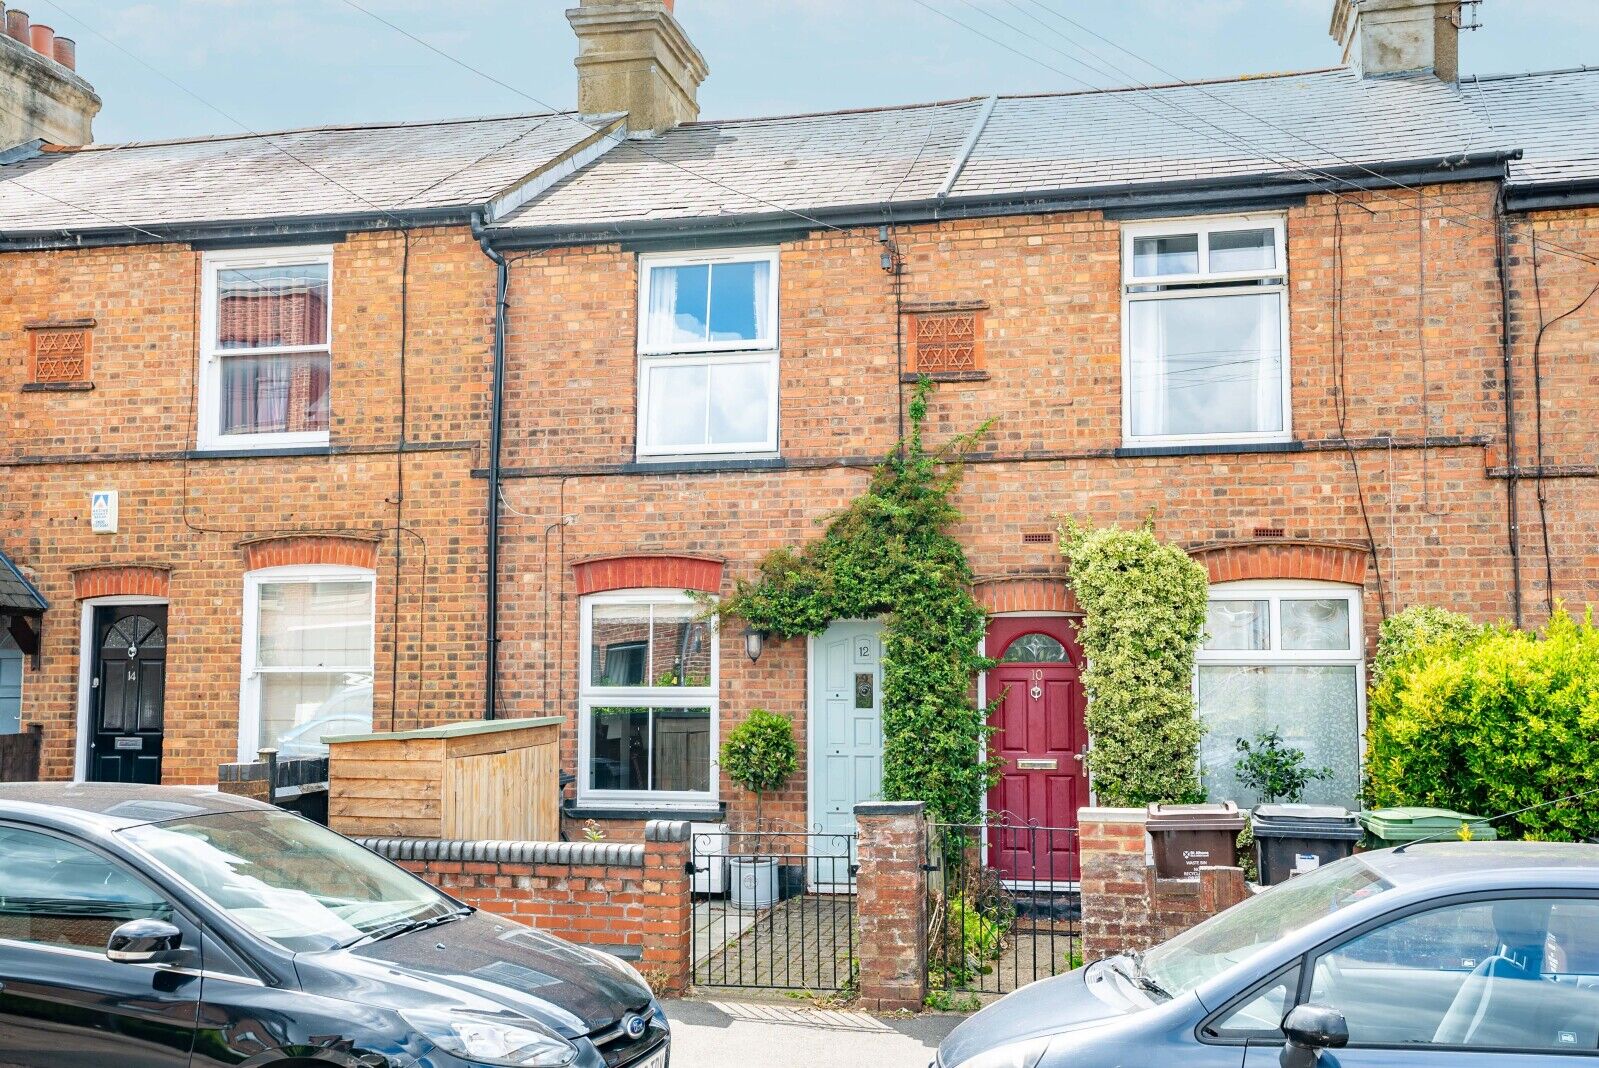 2 bedroom mid terraced house for sale Hedley Road, AL1, main image